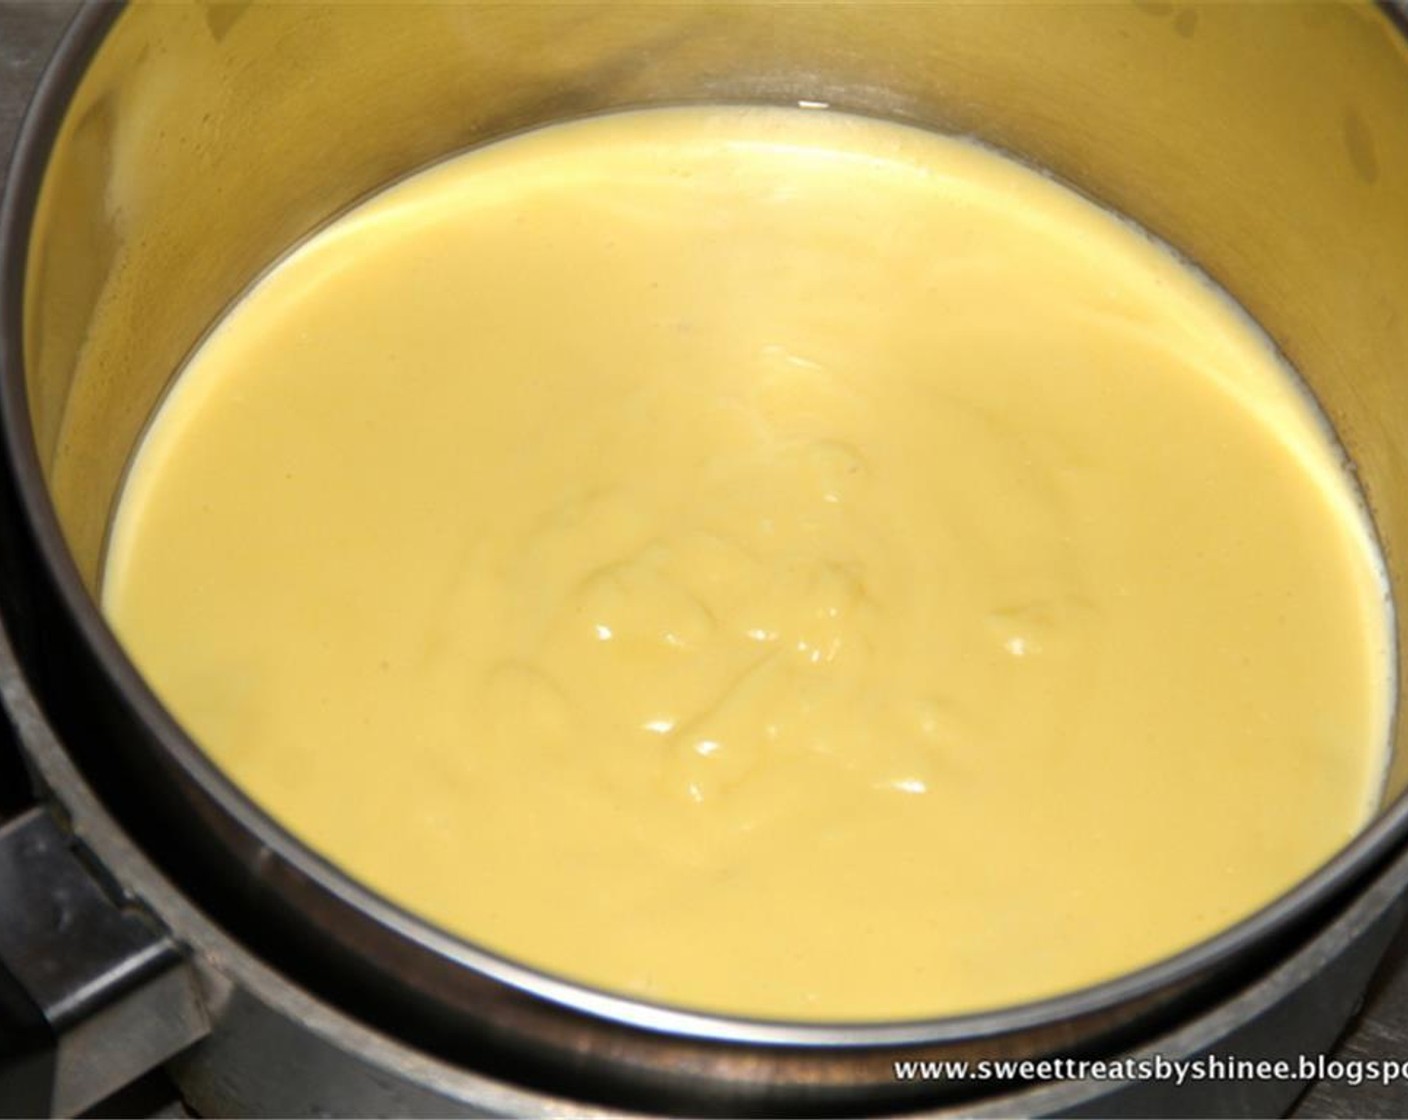 step 4 To temper the egg yolk mixture, add about 1/2 cup of the milk and mix quickly. Add the egg mixture to the milk. Cook over medium heat stirring frequently until it thickens.